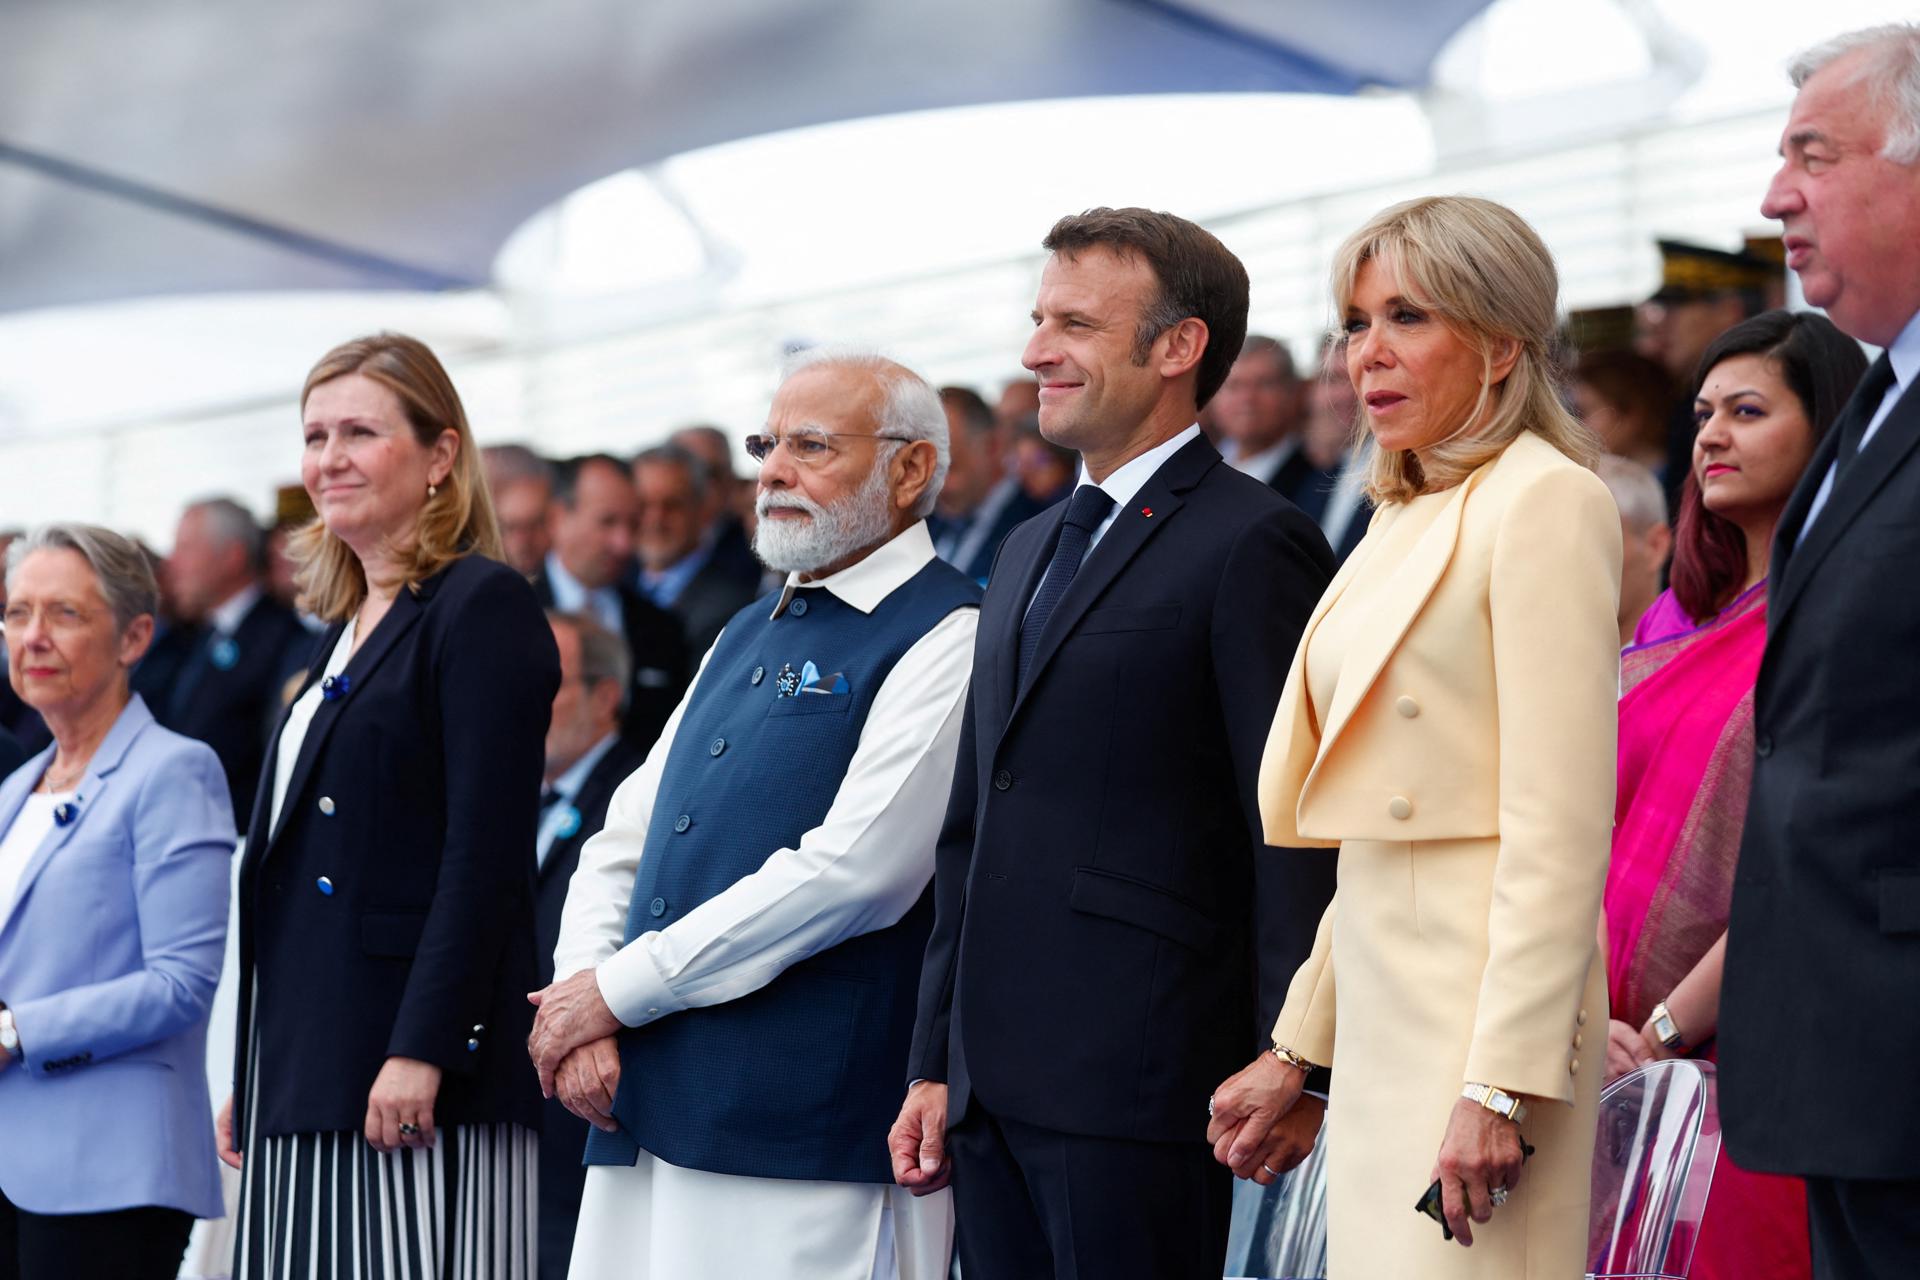 France's President Emmanuel Macron, first lady Brigitte Macron, India's Prime Minister Narendra Modi and France's Prime Minister Elisabeth Borne attend the annual Bastille Day military parade on the Champs-Elysees avenue in Paris, France, 14 July 2023. EFE-EPA/GONZALO FUENTES / POOL MAXPPP OUT
